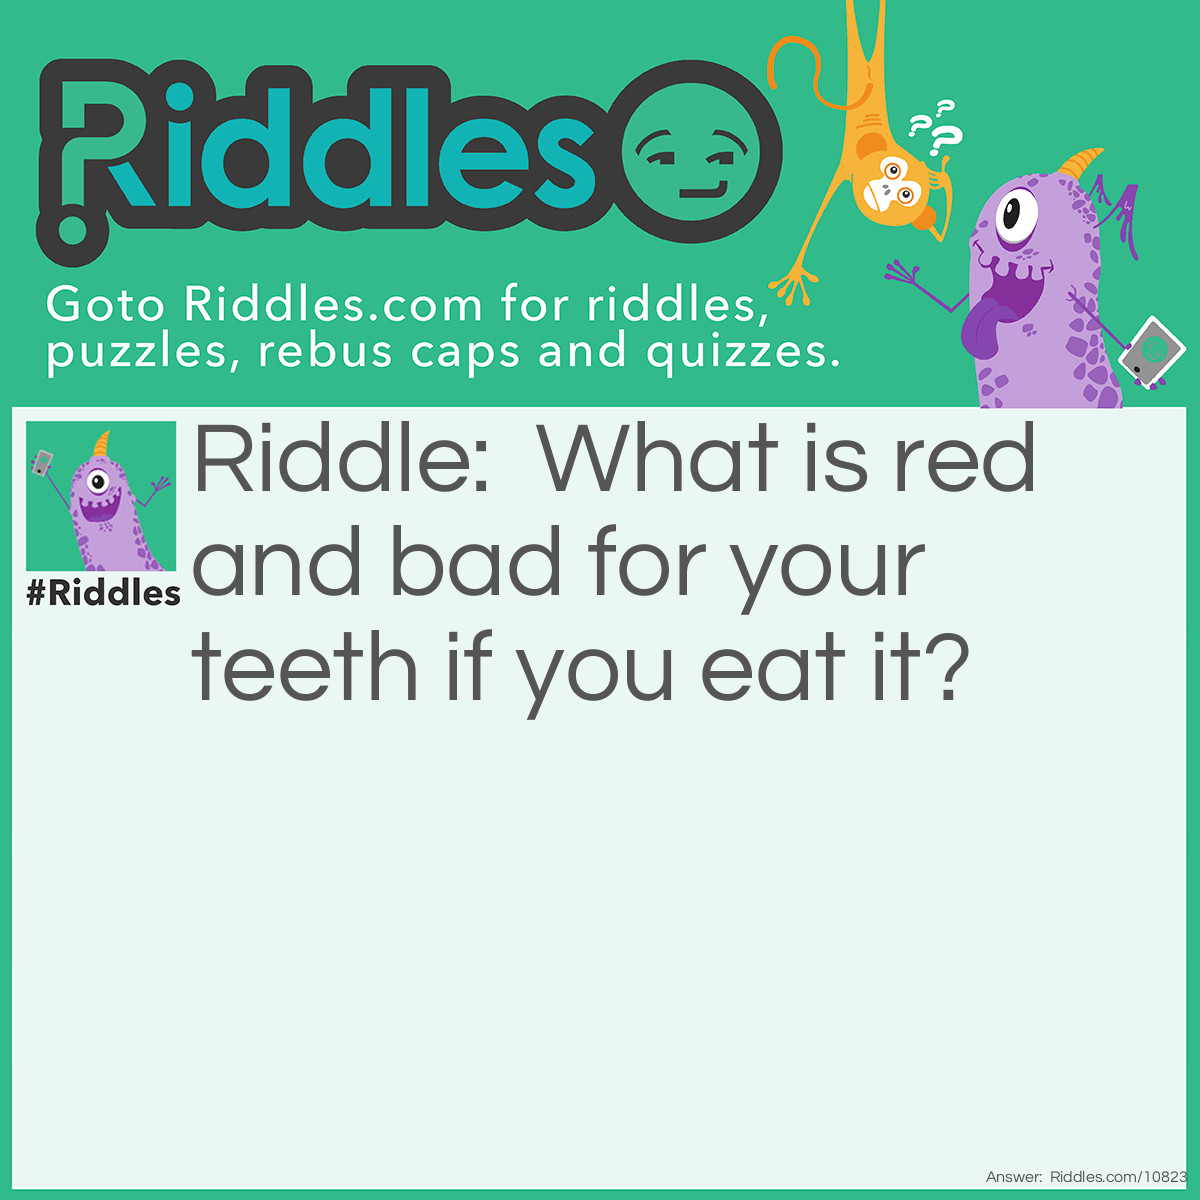 Riddle: What is red and bad for your teeth if you eat it? Answer: A brick.